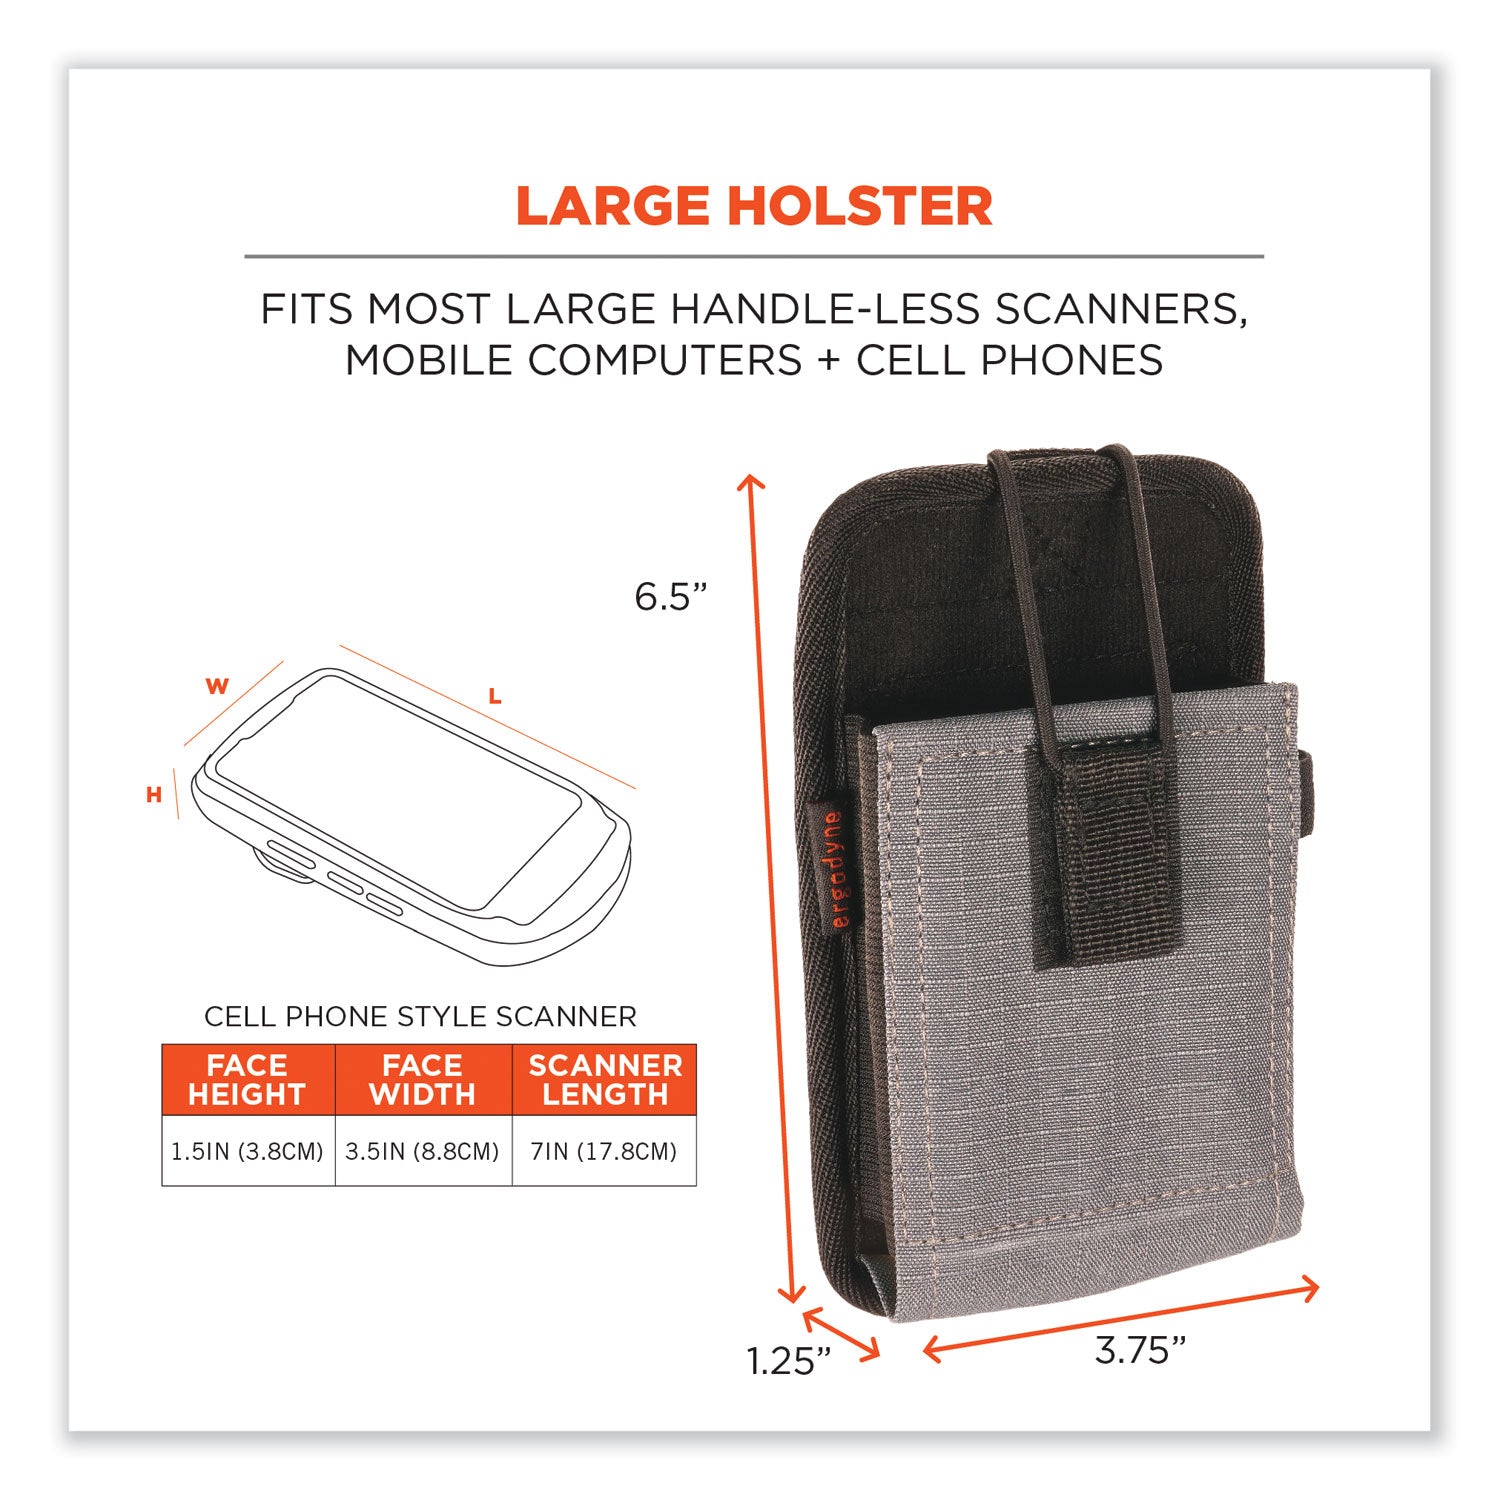 squids-5544-phone-style-scanner-holster-w-belt-clip-and-loops-1-comp-375-x-125-x-65-gray-ships-in-1-3-business-days_ego19187 - 2